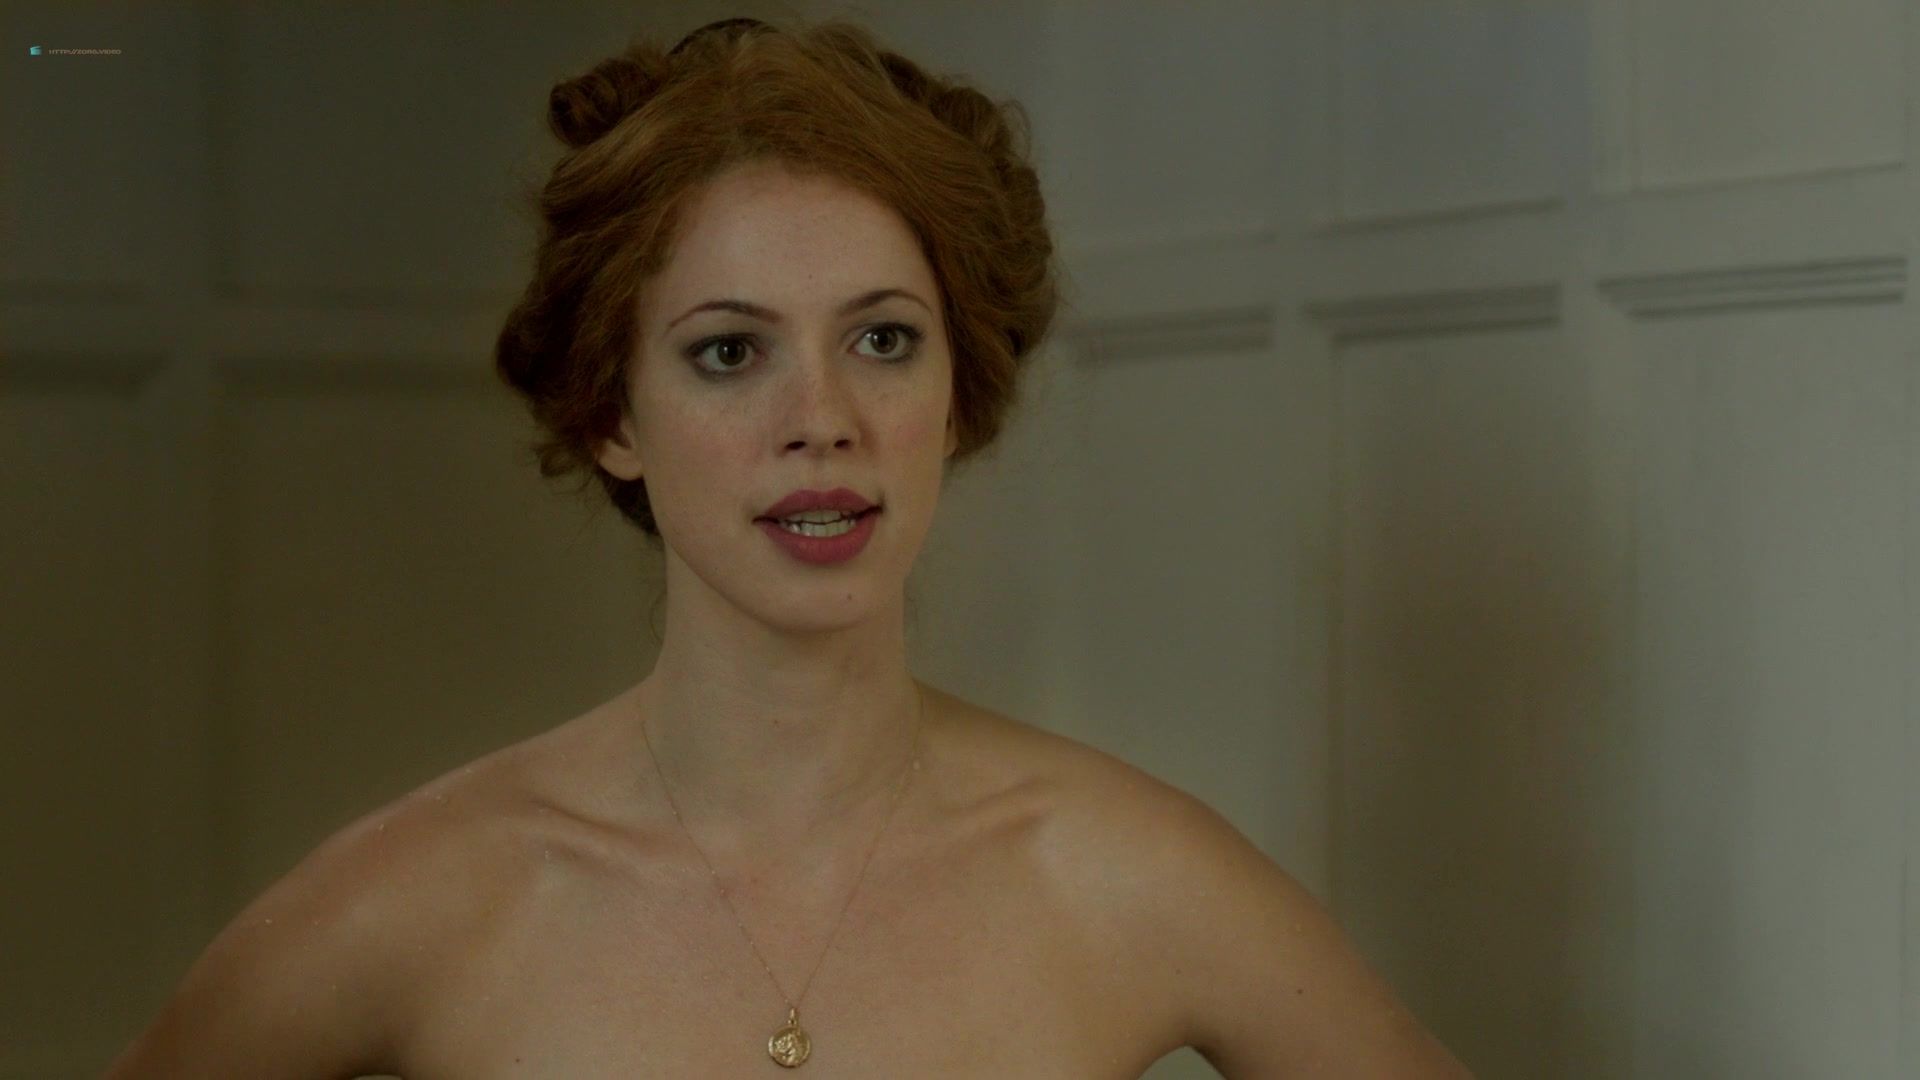 Domination Rebecca Hall, Adelaide Clemens nude - Parades End (2012) Load - 2